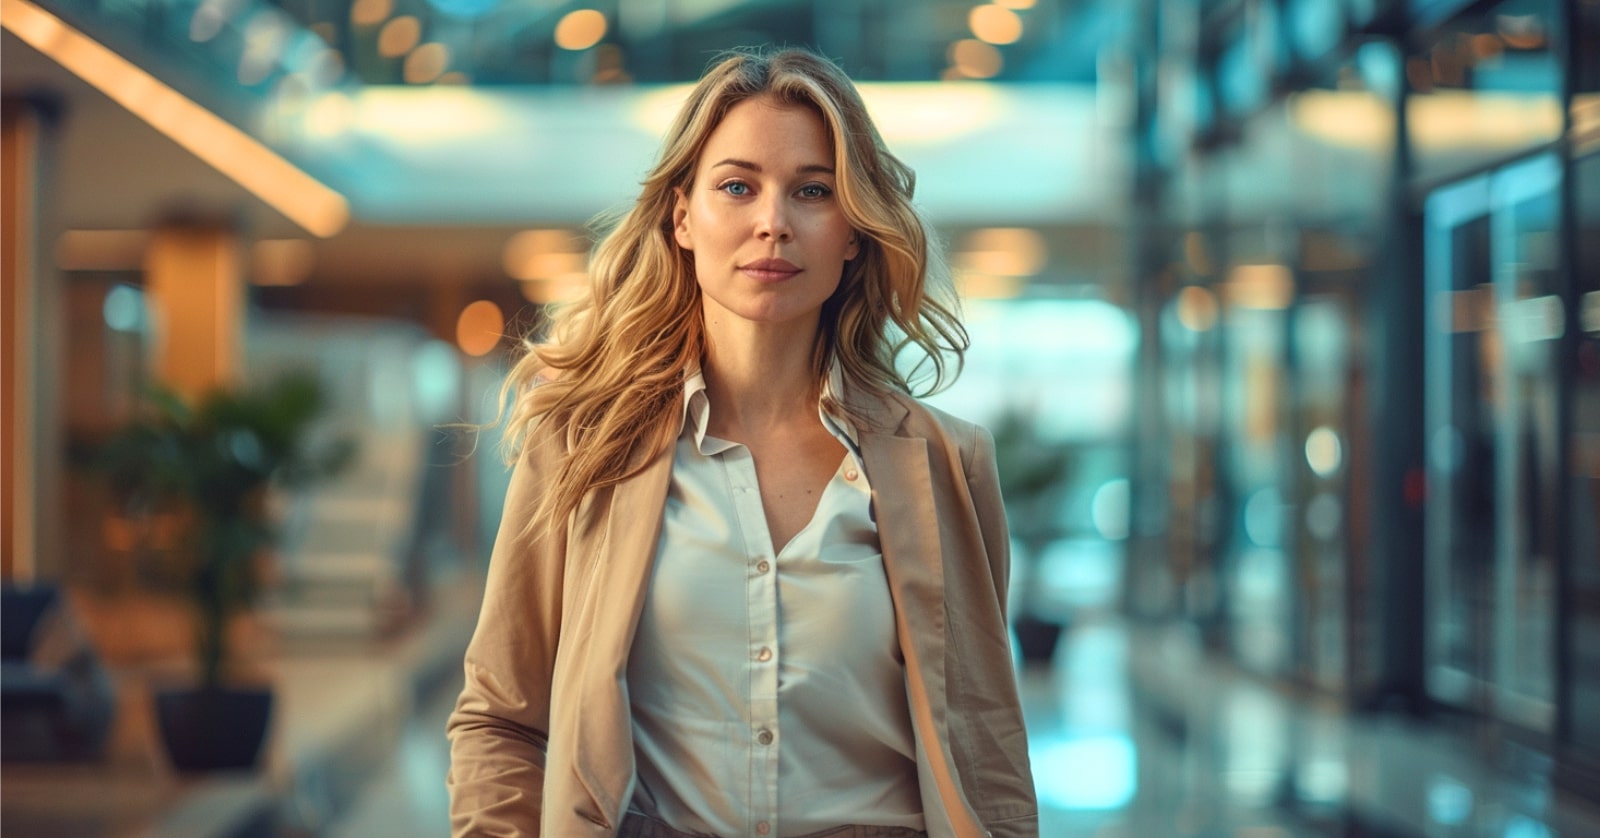 a blonde woman in smart-casual business attire walking confidently along a smart office foyer with lots of glass